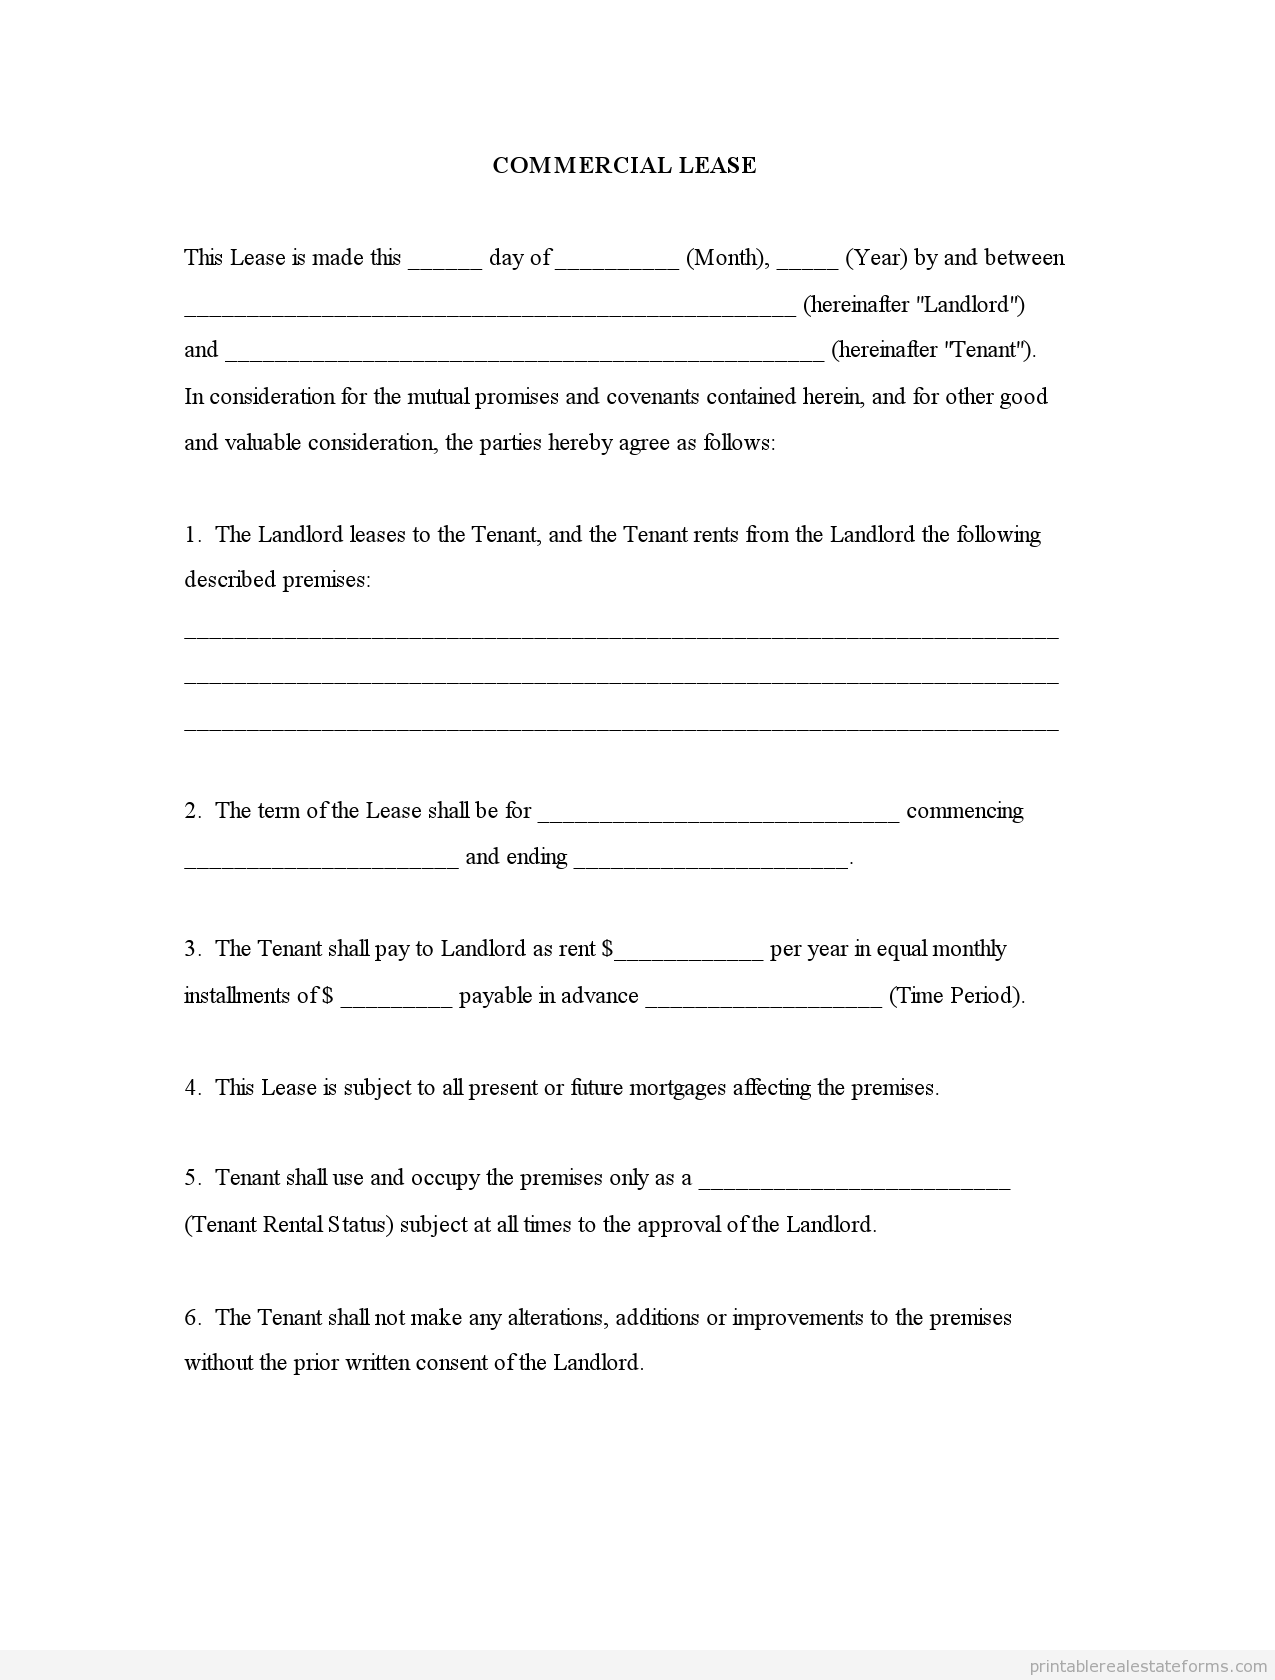 free-commercial-lease-agreement-printable-printable-lease-agreement